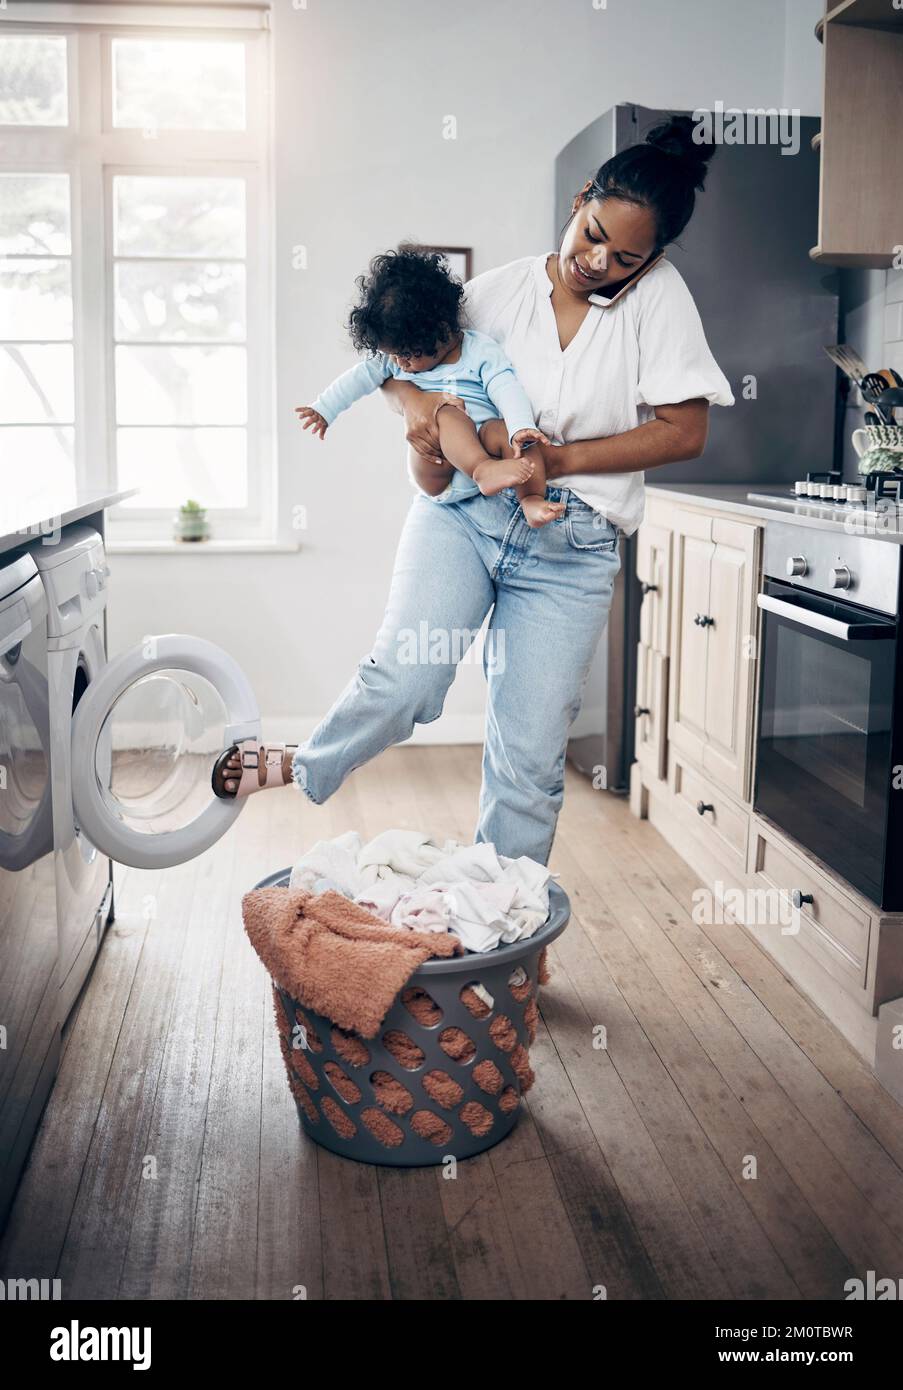 Babys laundry cannot wait. a young mother using a cellphone while completing housework and holding her baby at home. Stock Photo